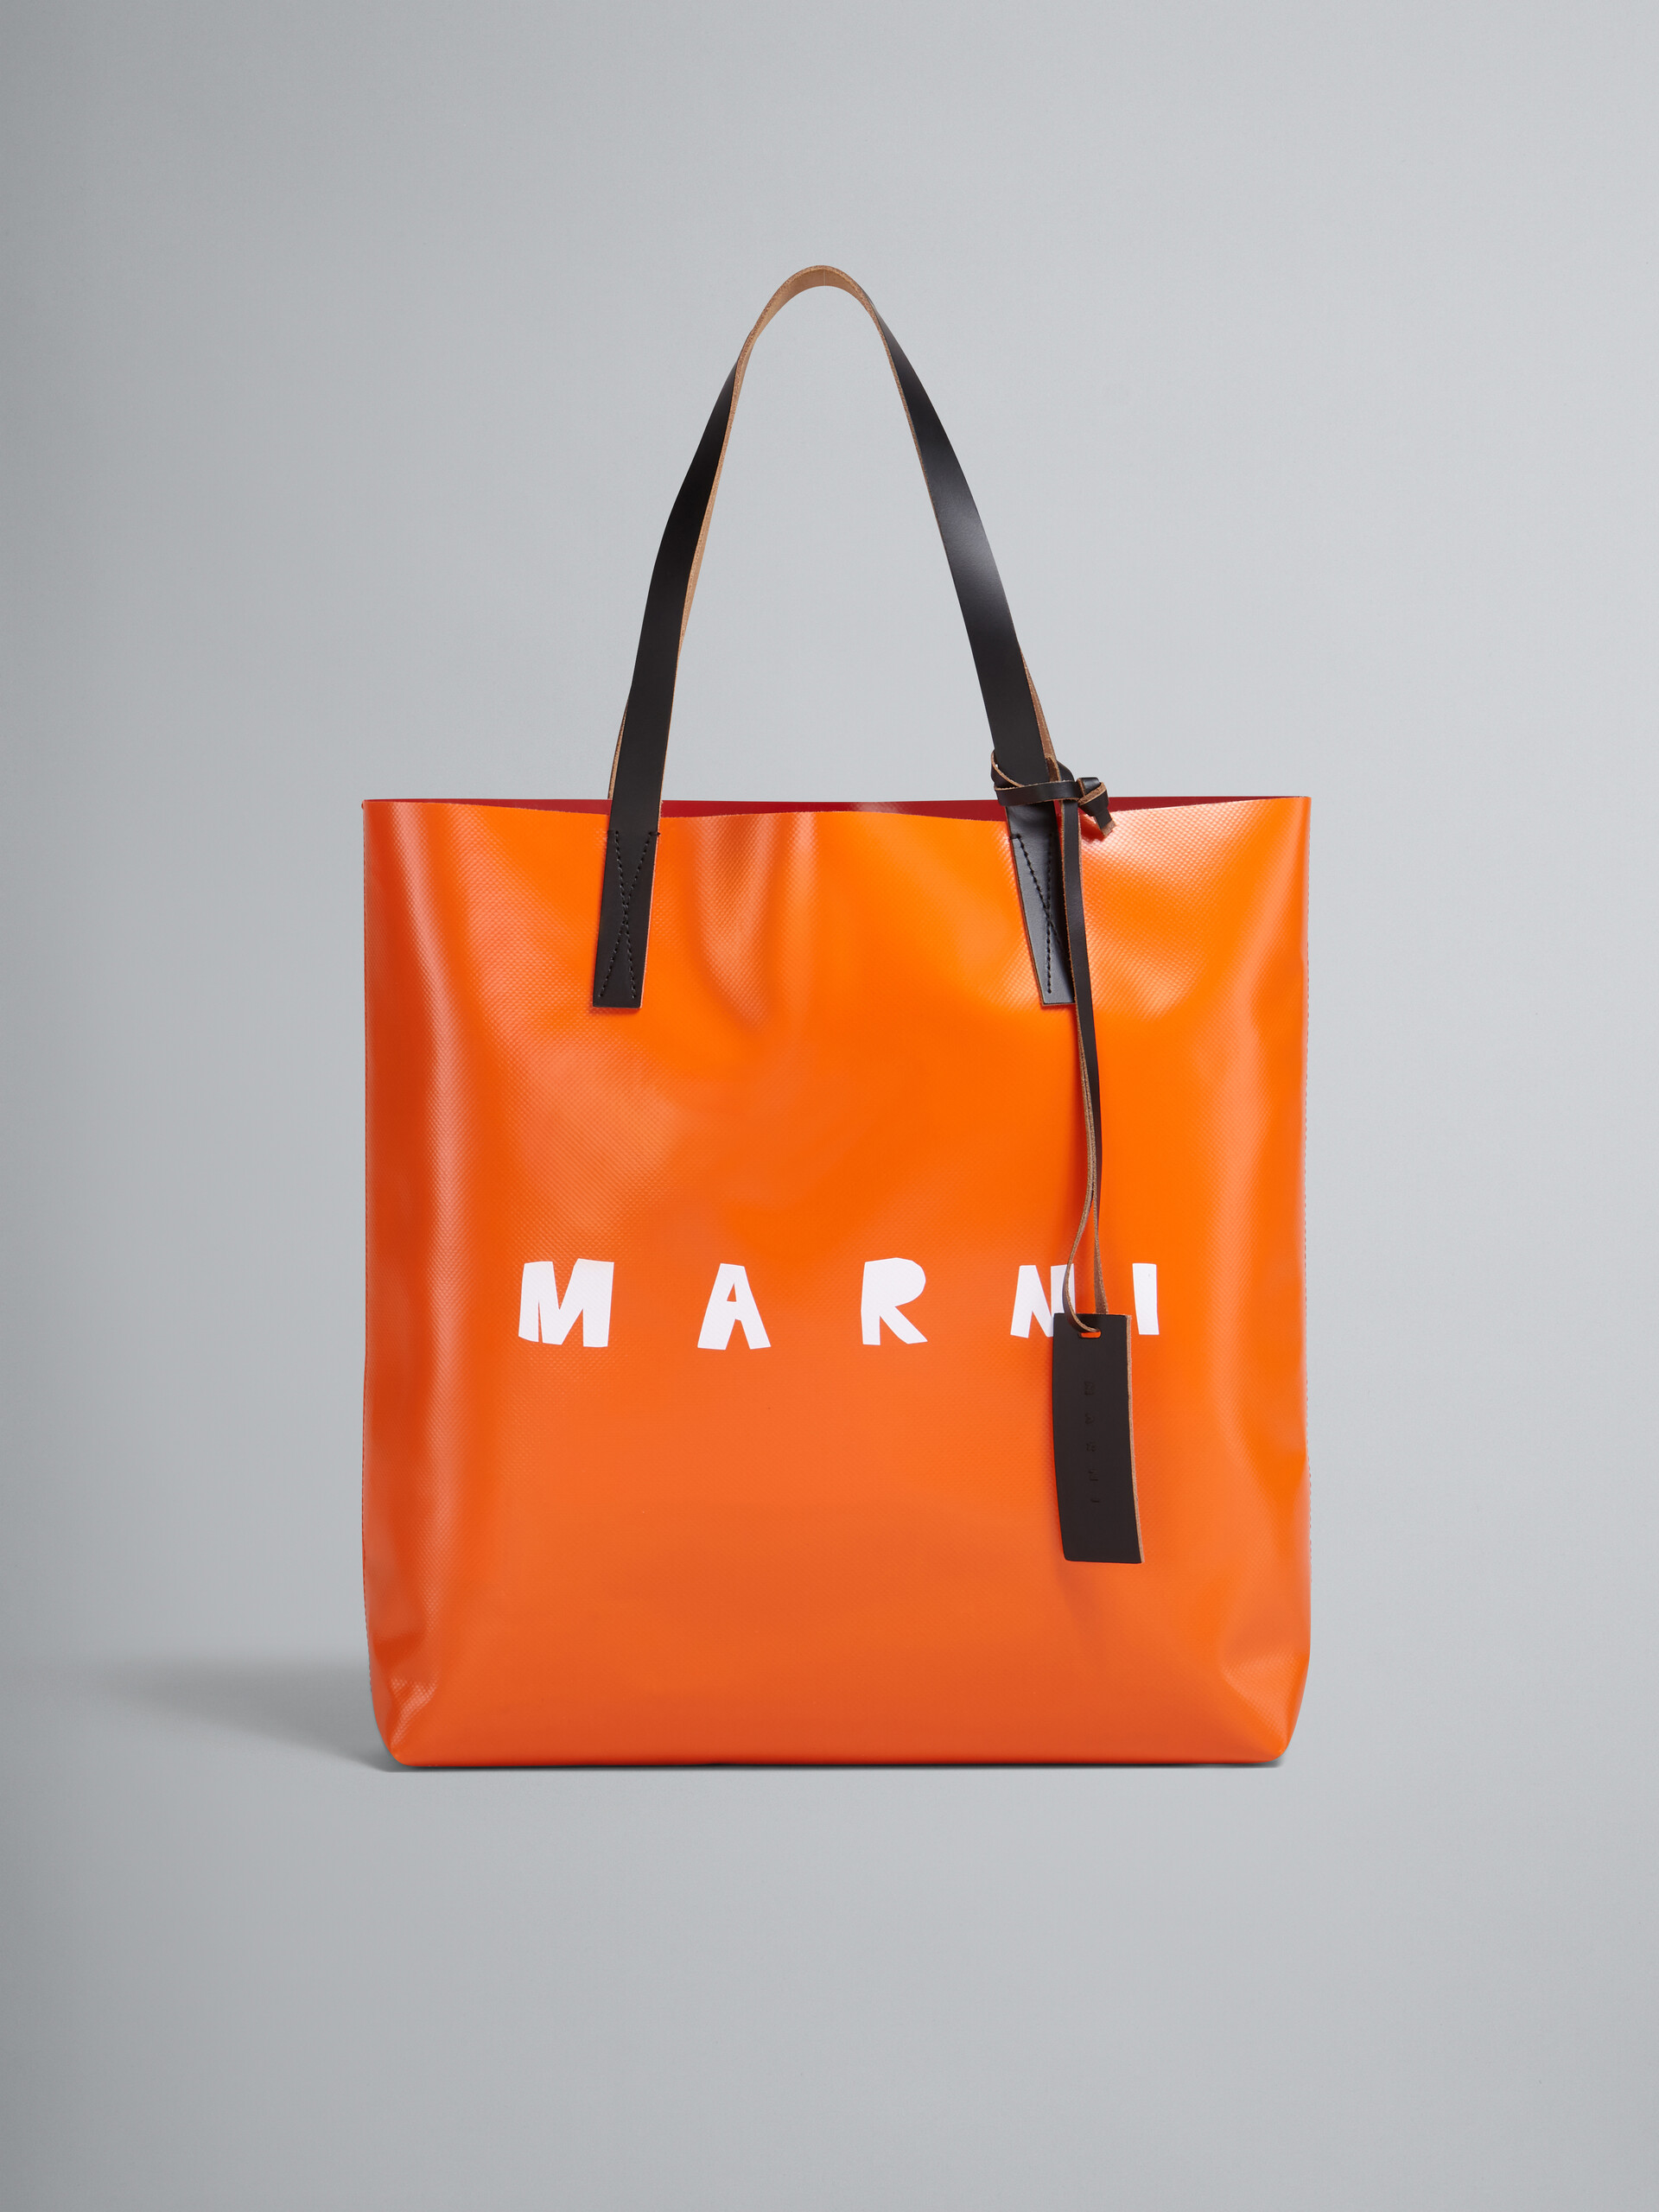 Red and orange TRIBECA shopping bag with Marni logo - Shopping Bags - Image 1